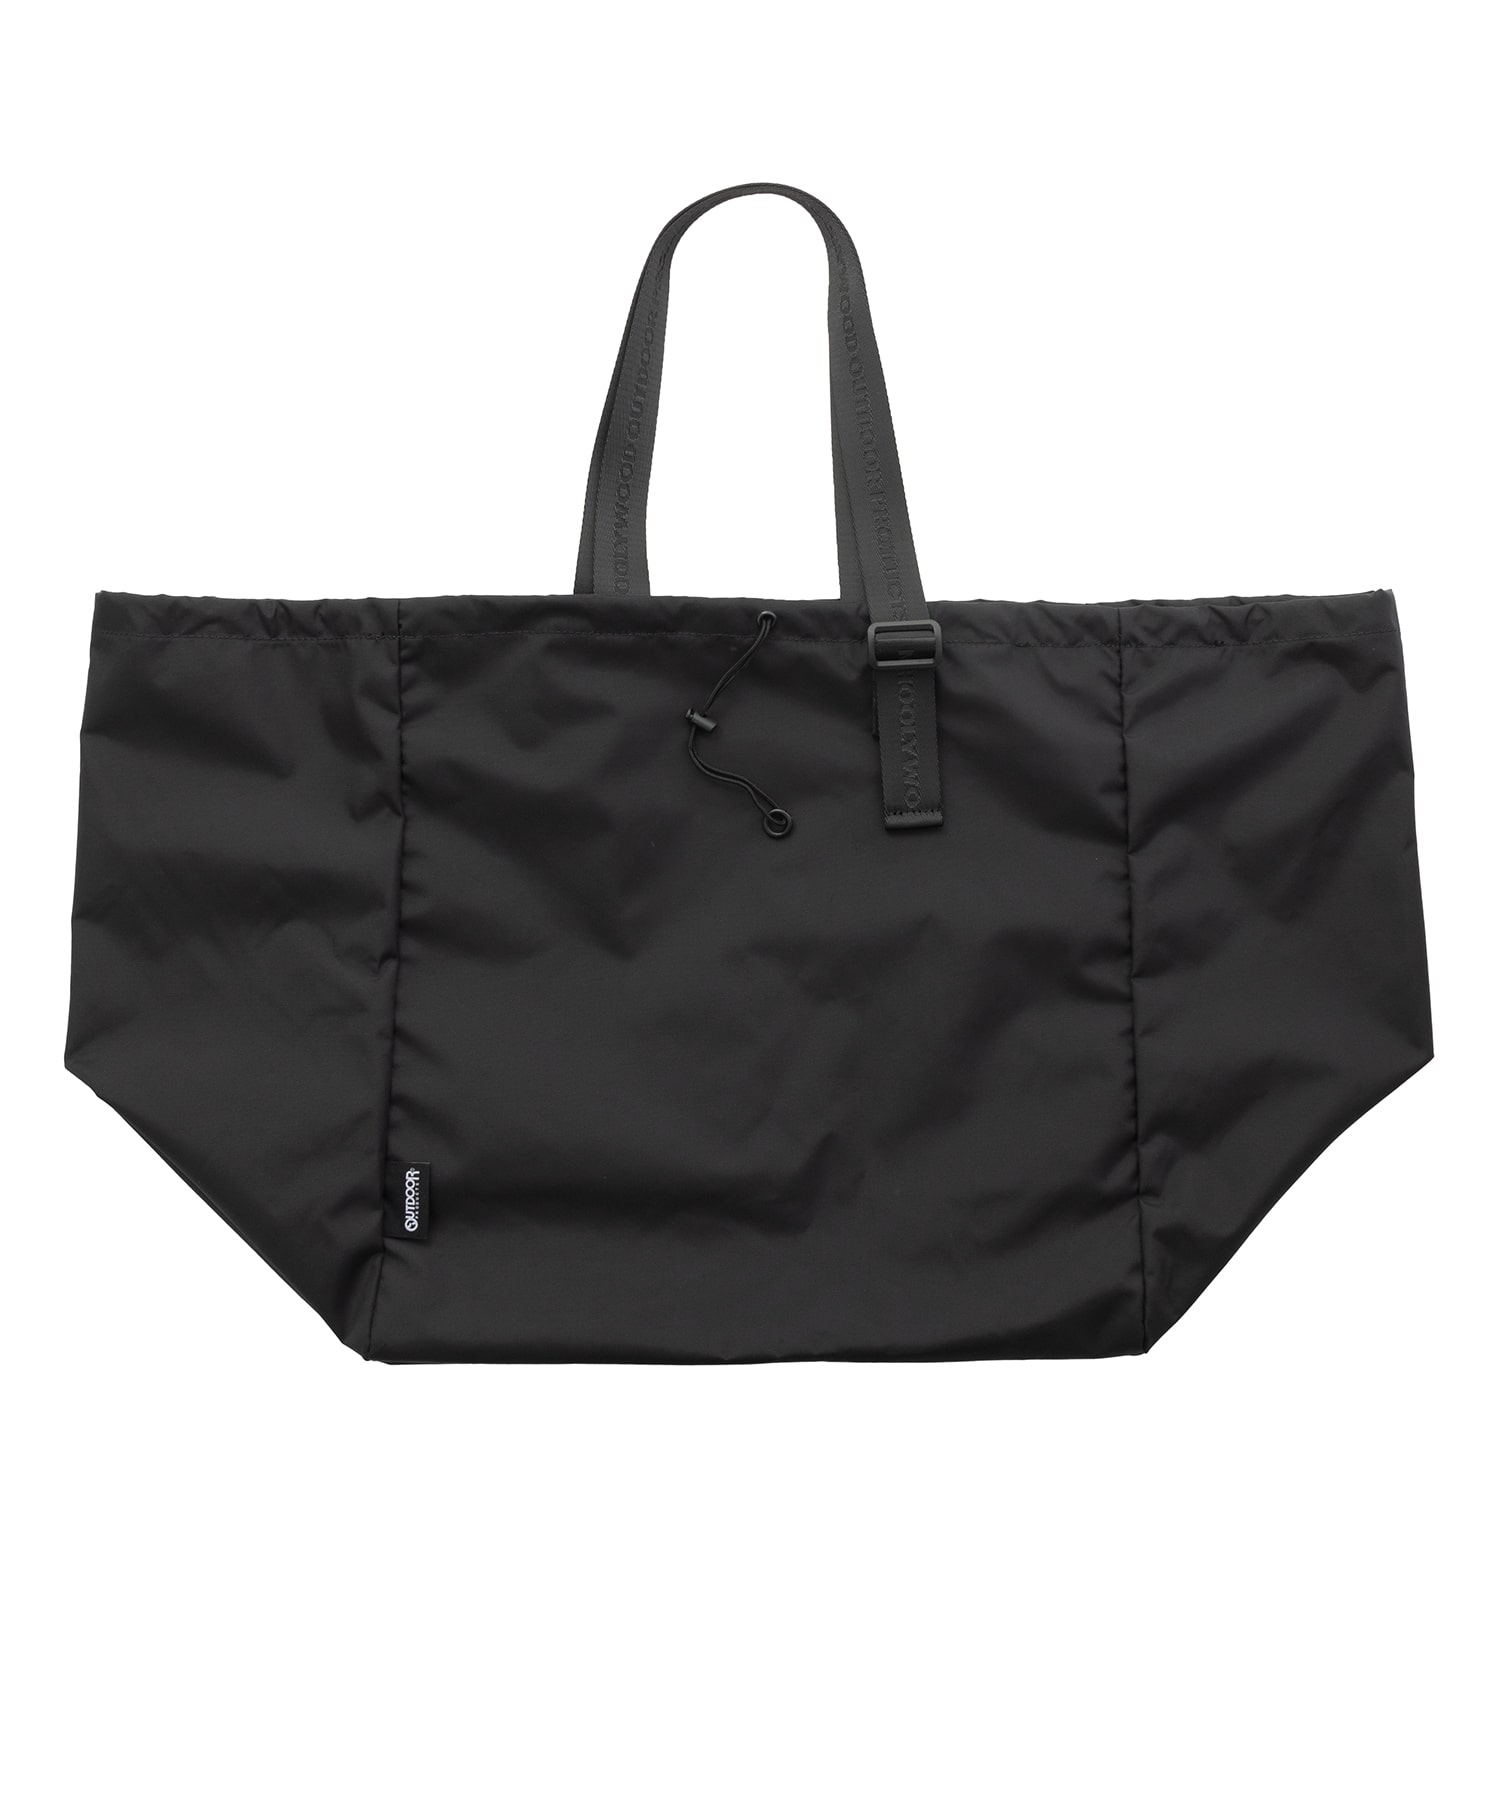 OUTDOOR PRODUCTS TOTE BAG